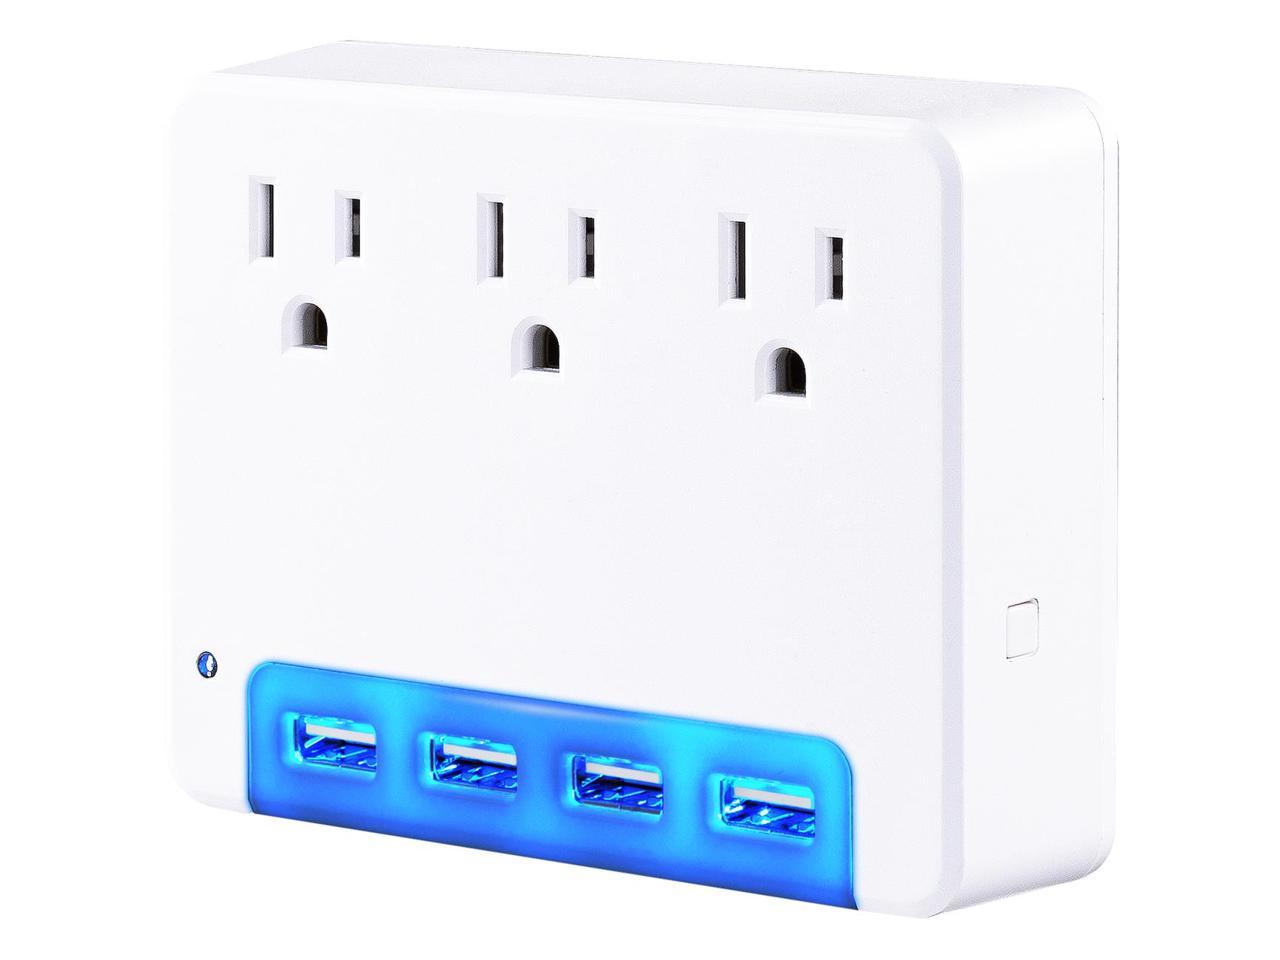 CyberPower Professional P3WUN 3-Outlet Surge Suppressor/Protector - 3 x NEMA 5-15R, 4 x USB - 120 V Input